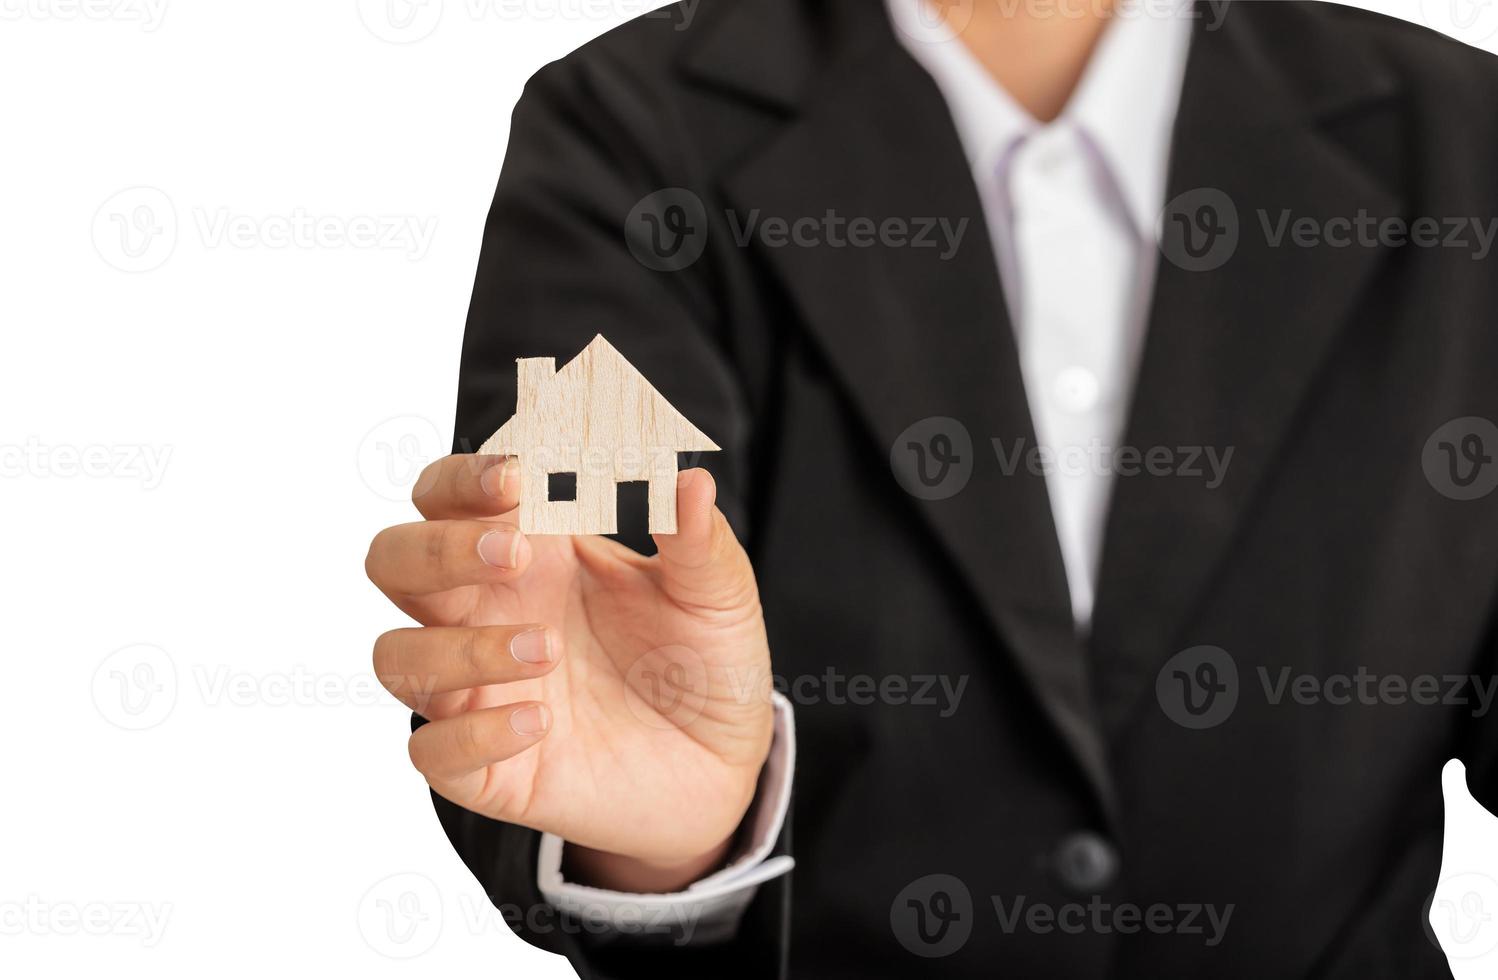 The woman wearing a black suit used a hand right holding a simulated wooden house photo